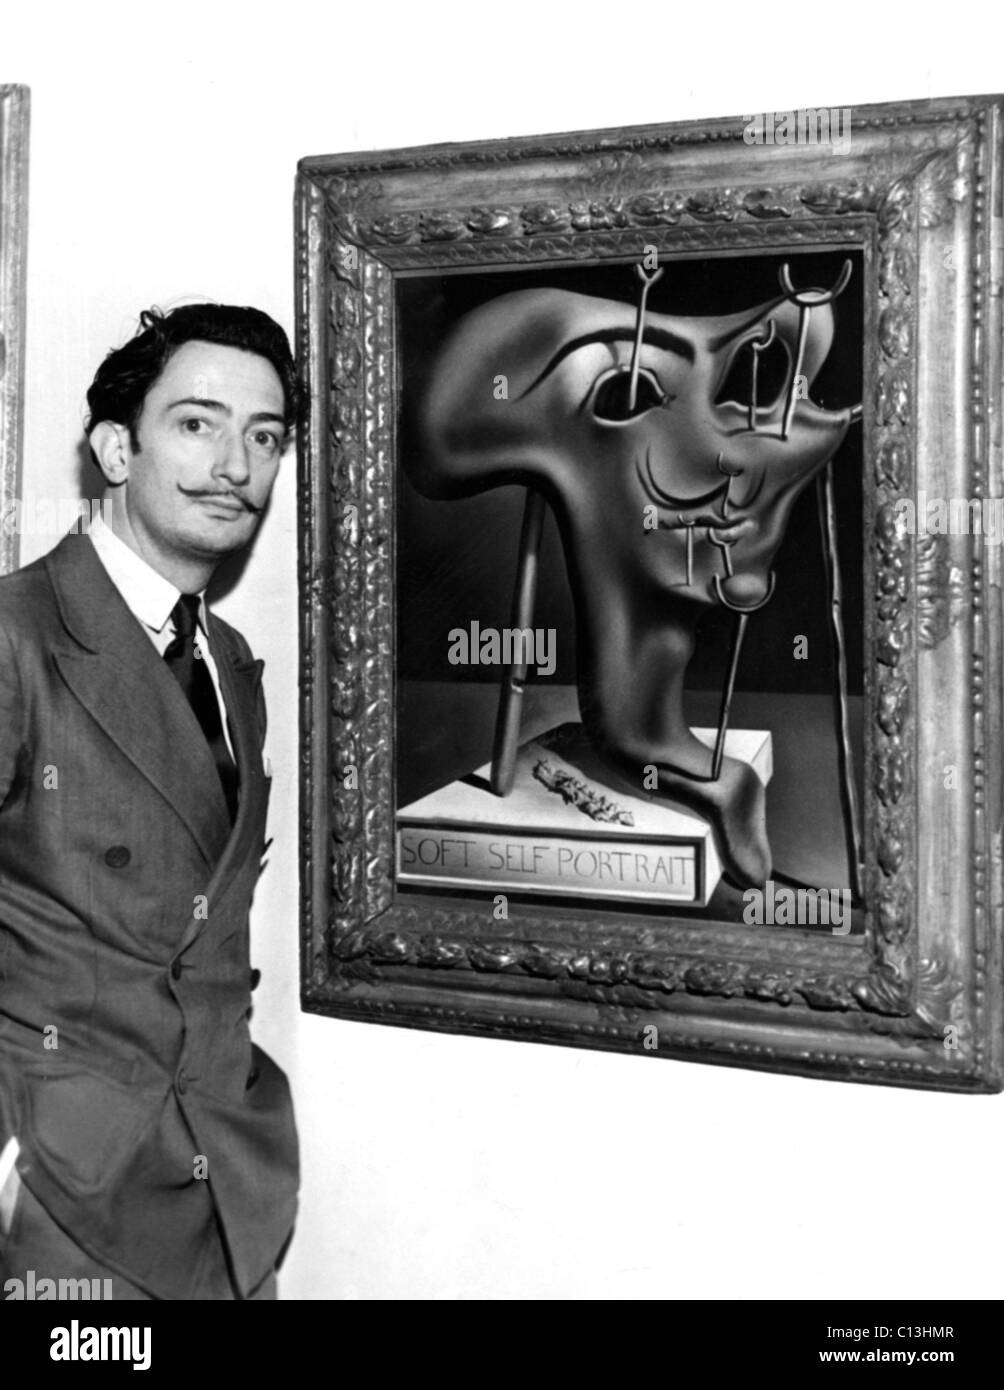 Salvador Dali, showing off his piece entitled 'Soft Self Portrait' at the Julien Levy Gallery in New York, ca. 1941 Stock Photo